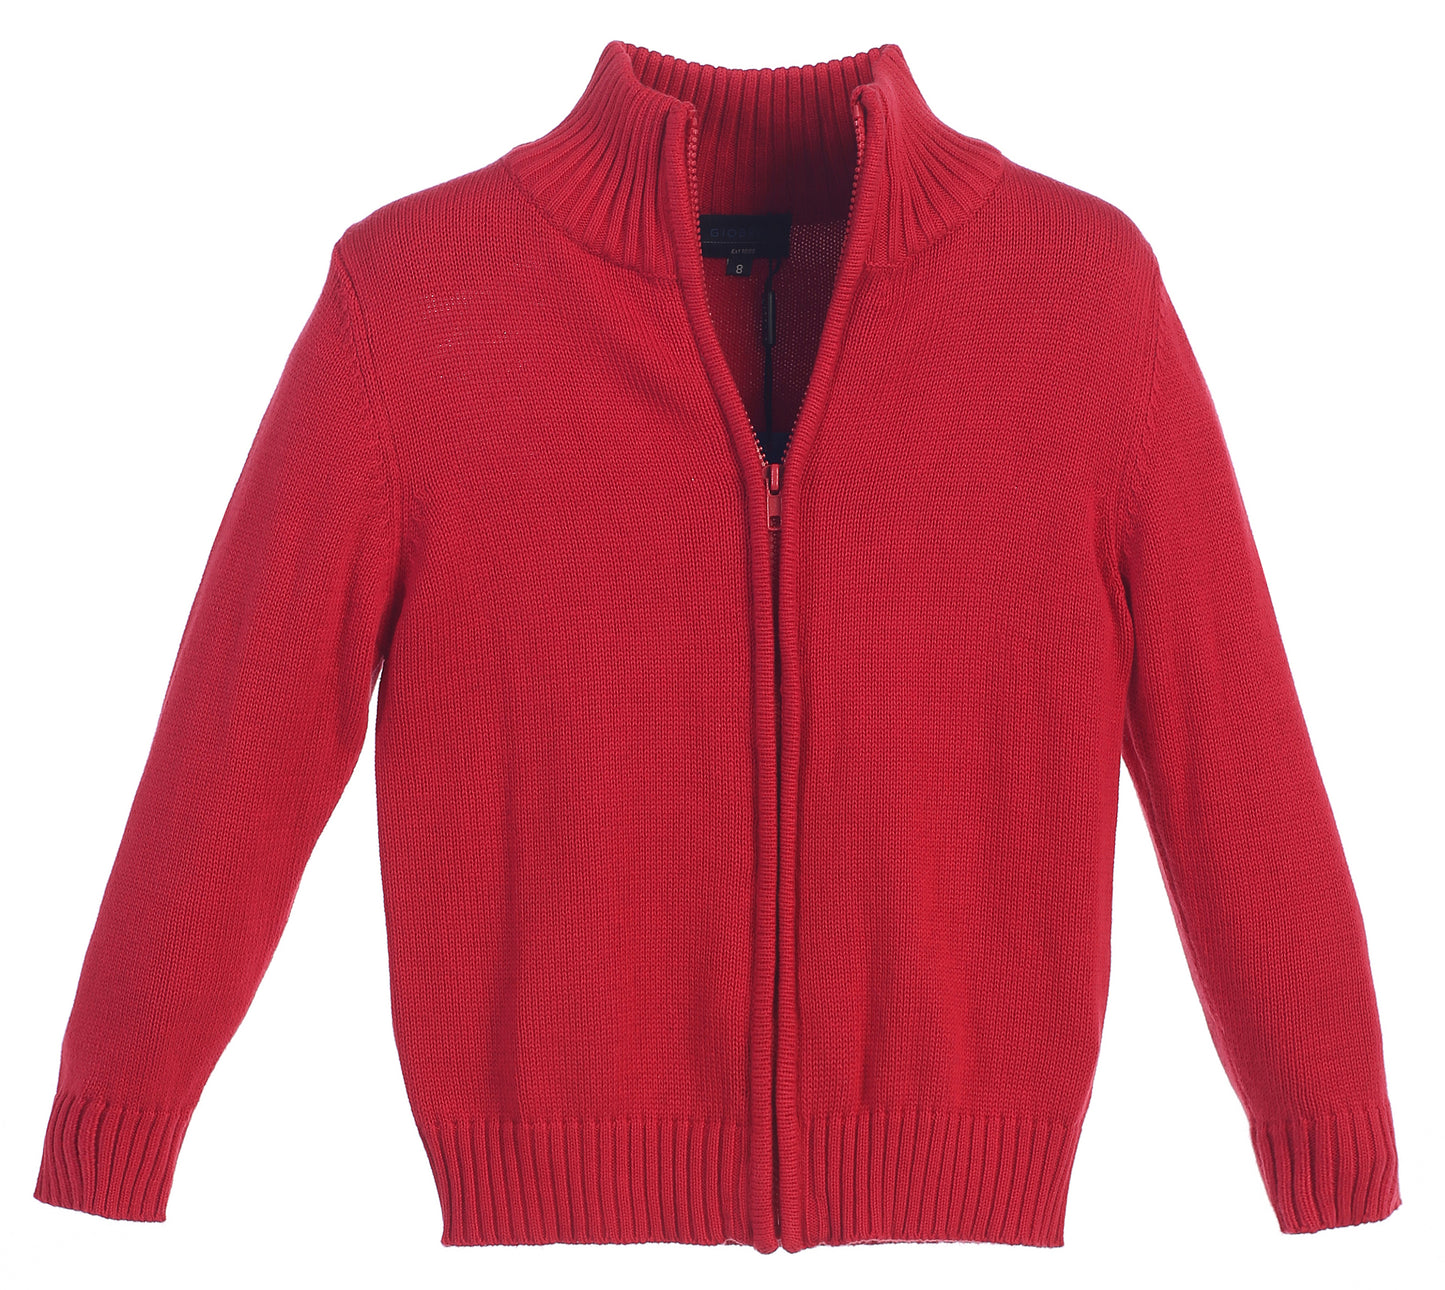 Knitted Full Zip 100% Cotton Sweater -Red